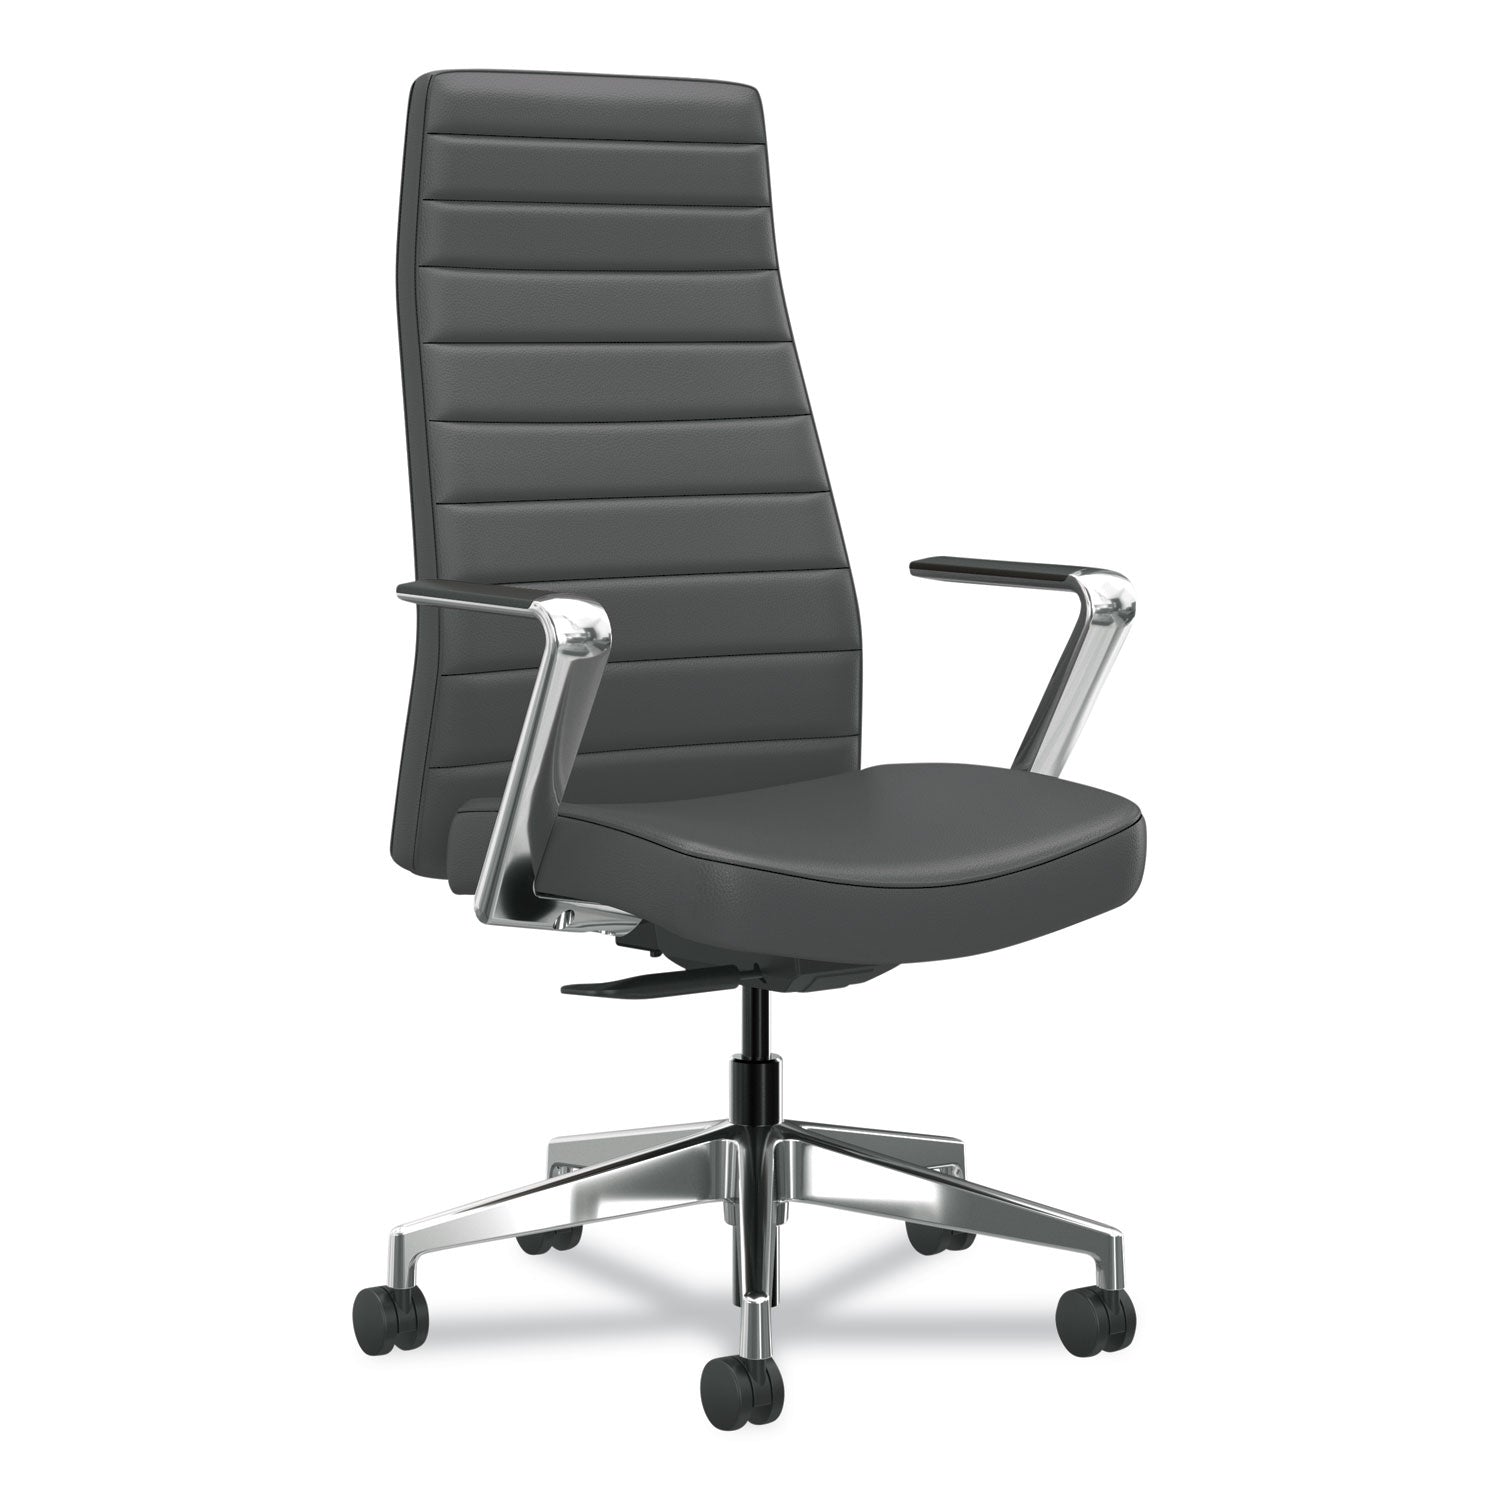 cofi-executive-high-back-chair-supports-up-to-300-lb-graphite-seat-back-polished-aluminum-baseships-in-7-10-business-days_honceuw0pu19c4p - 2